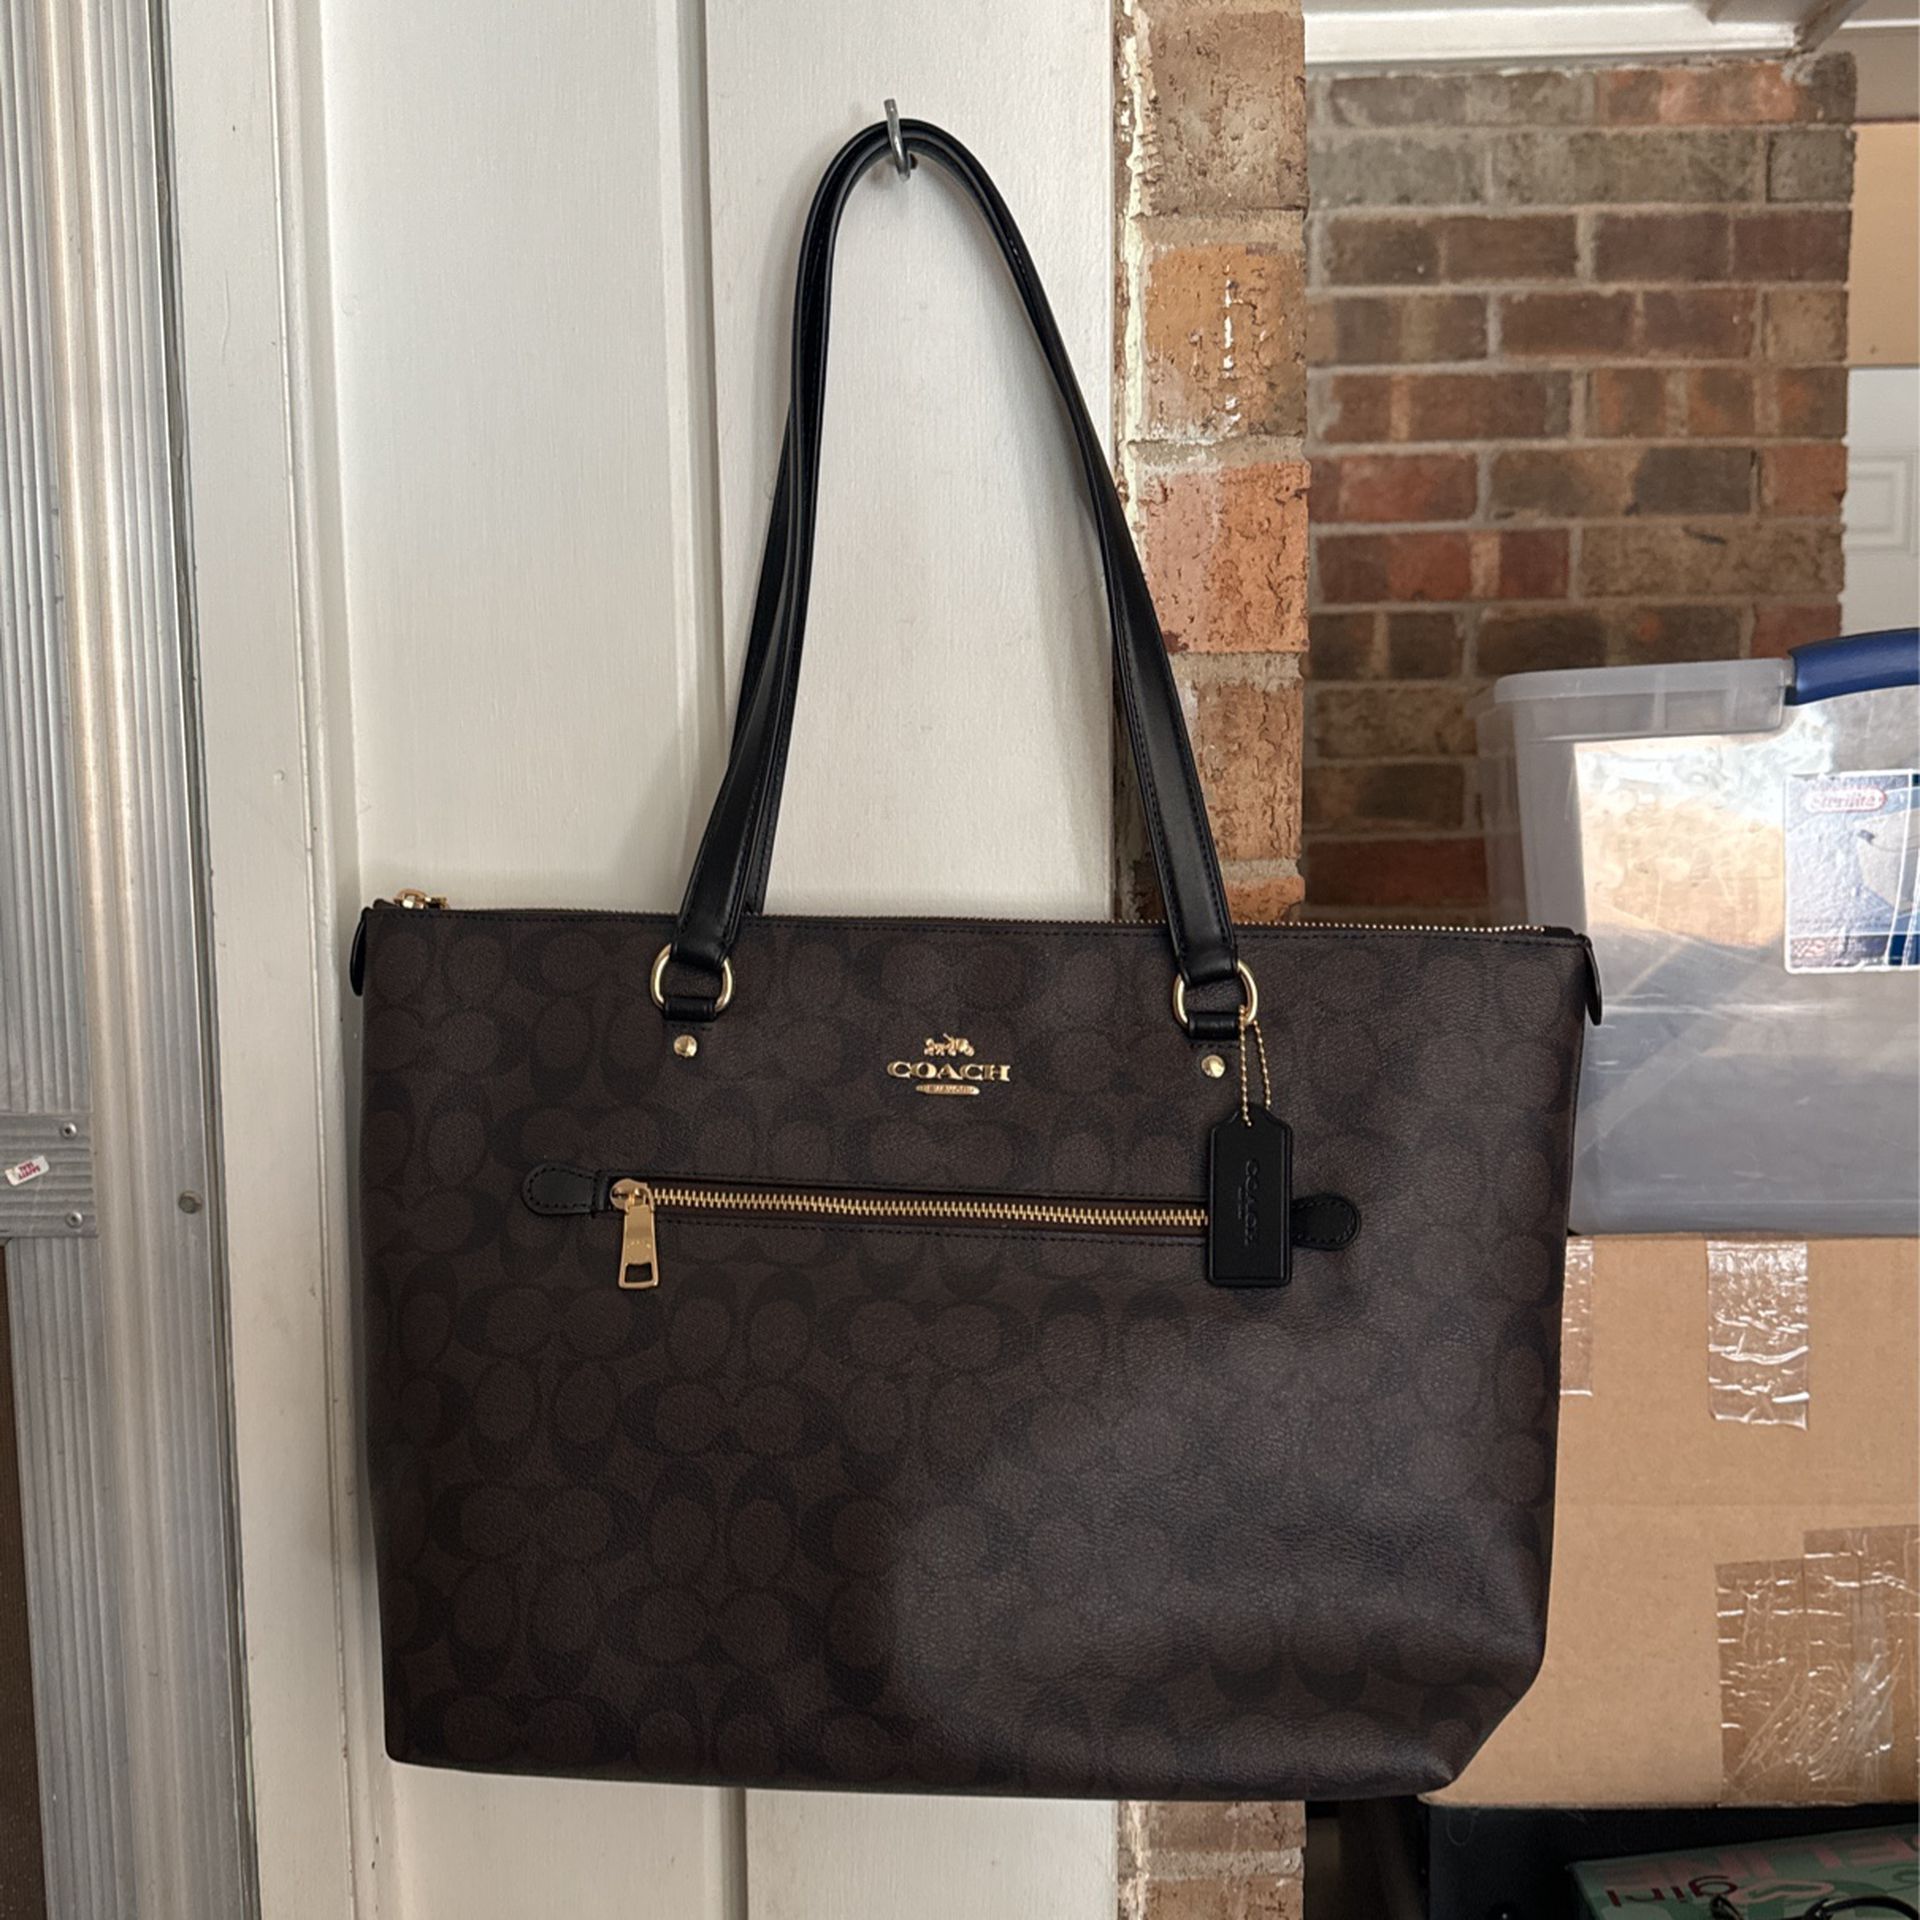 New Coach Large Tote Purse